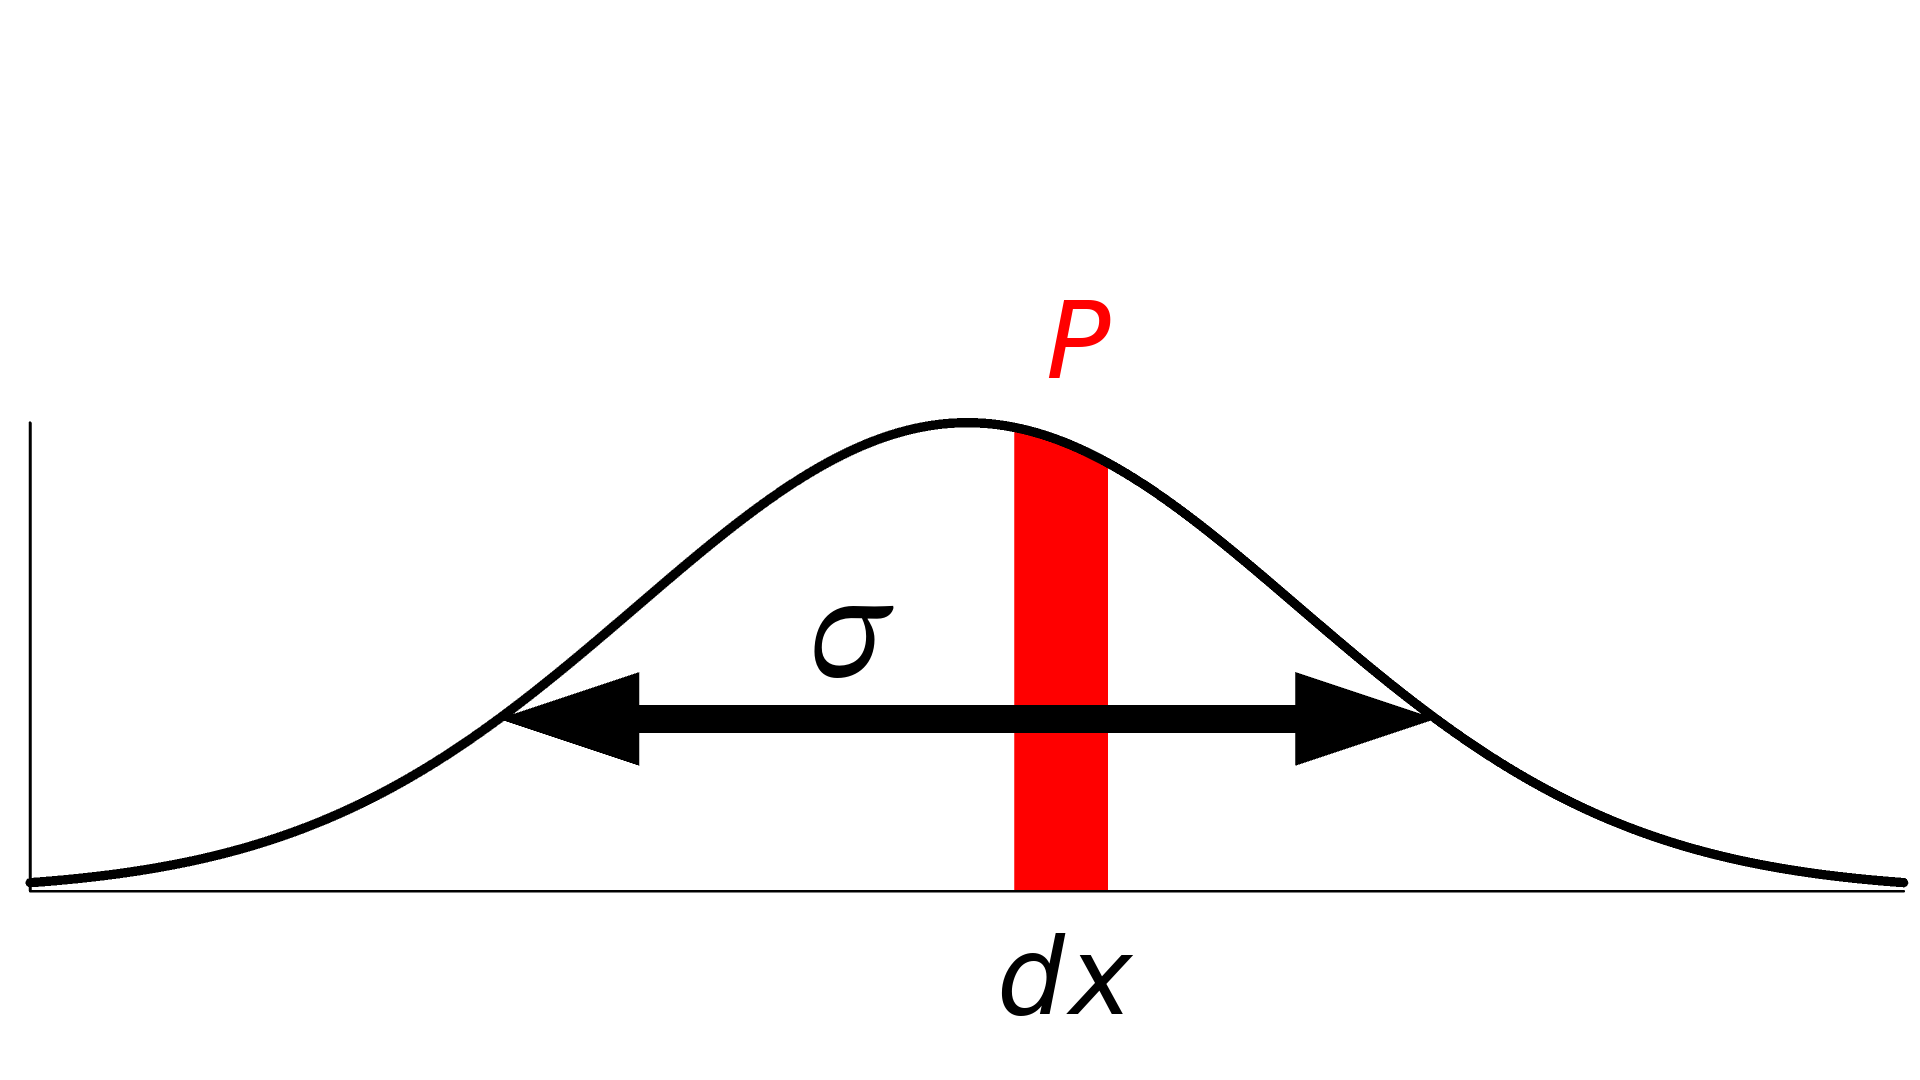 A bell curve with the standard deviation of the measurement error, infinitesimal range, and probability labeled, with the probability highlighted in red.